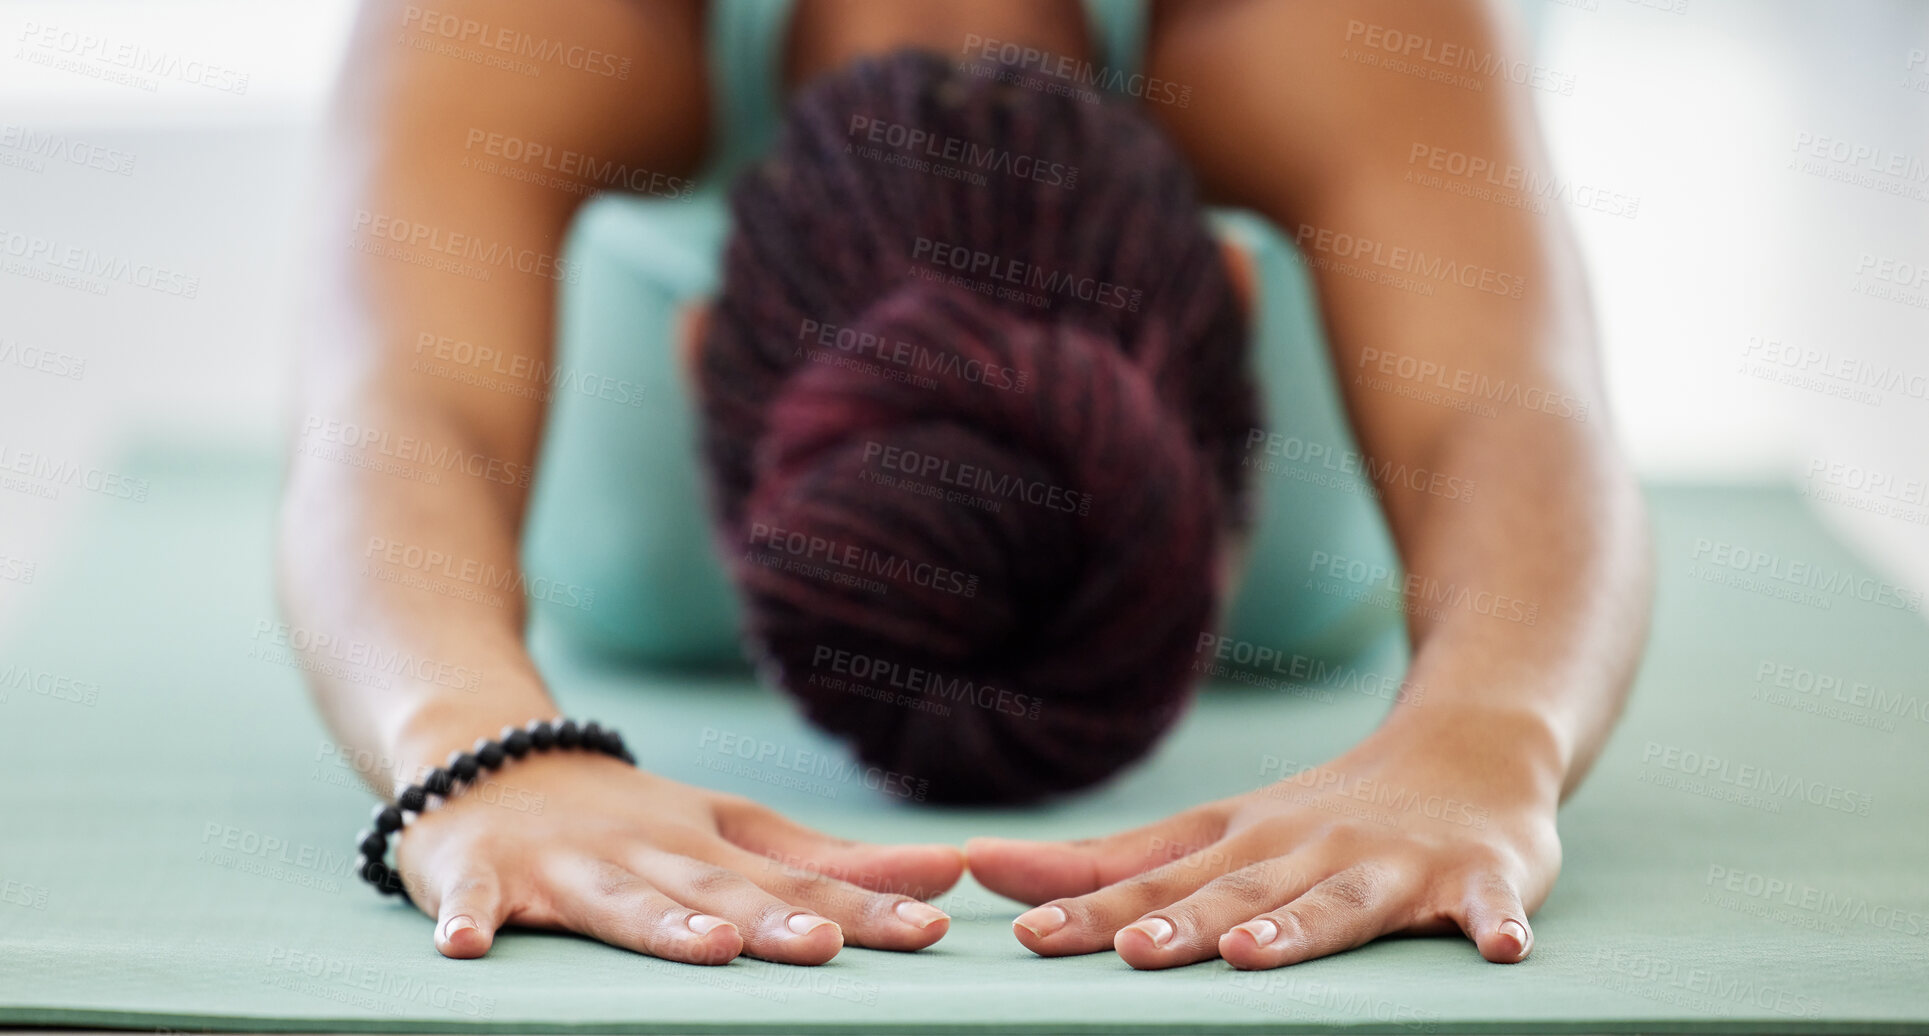 Buy stock photo Shot of an unrecognisable woman practising yoga in the studio and holding a child's pose